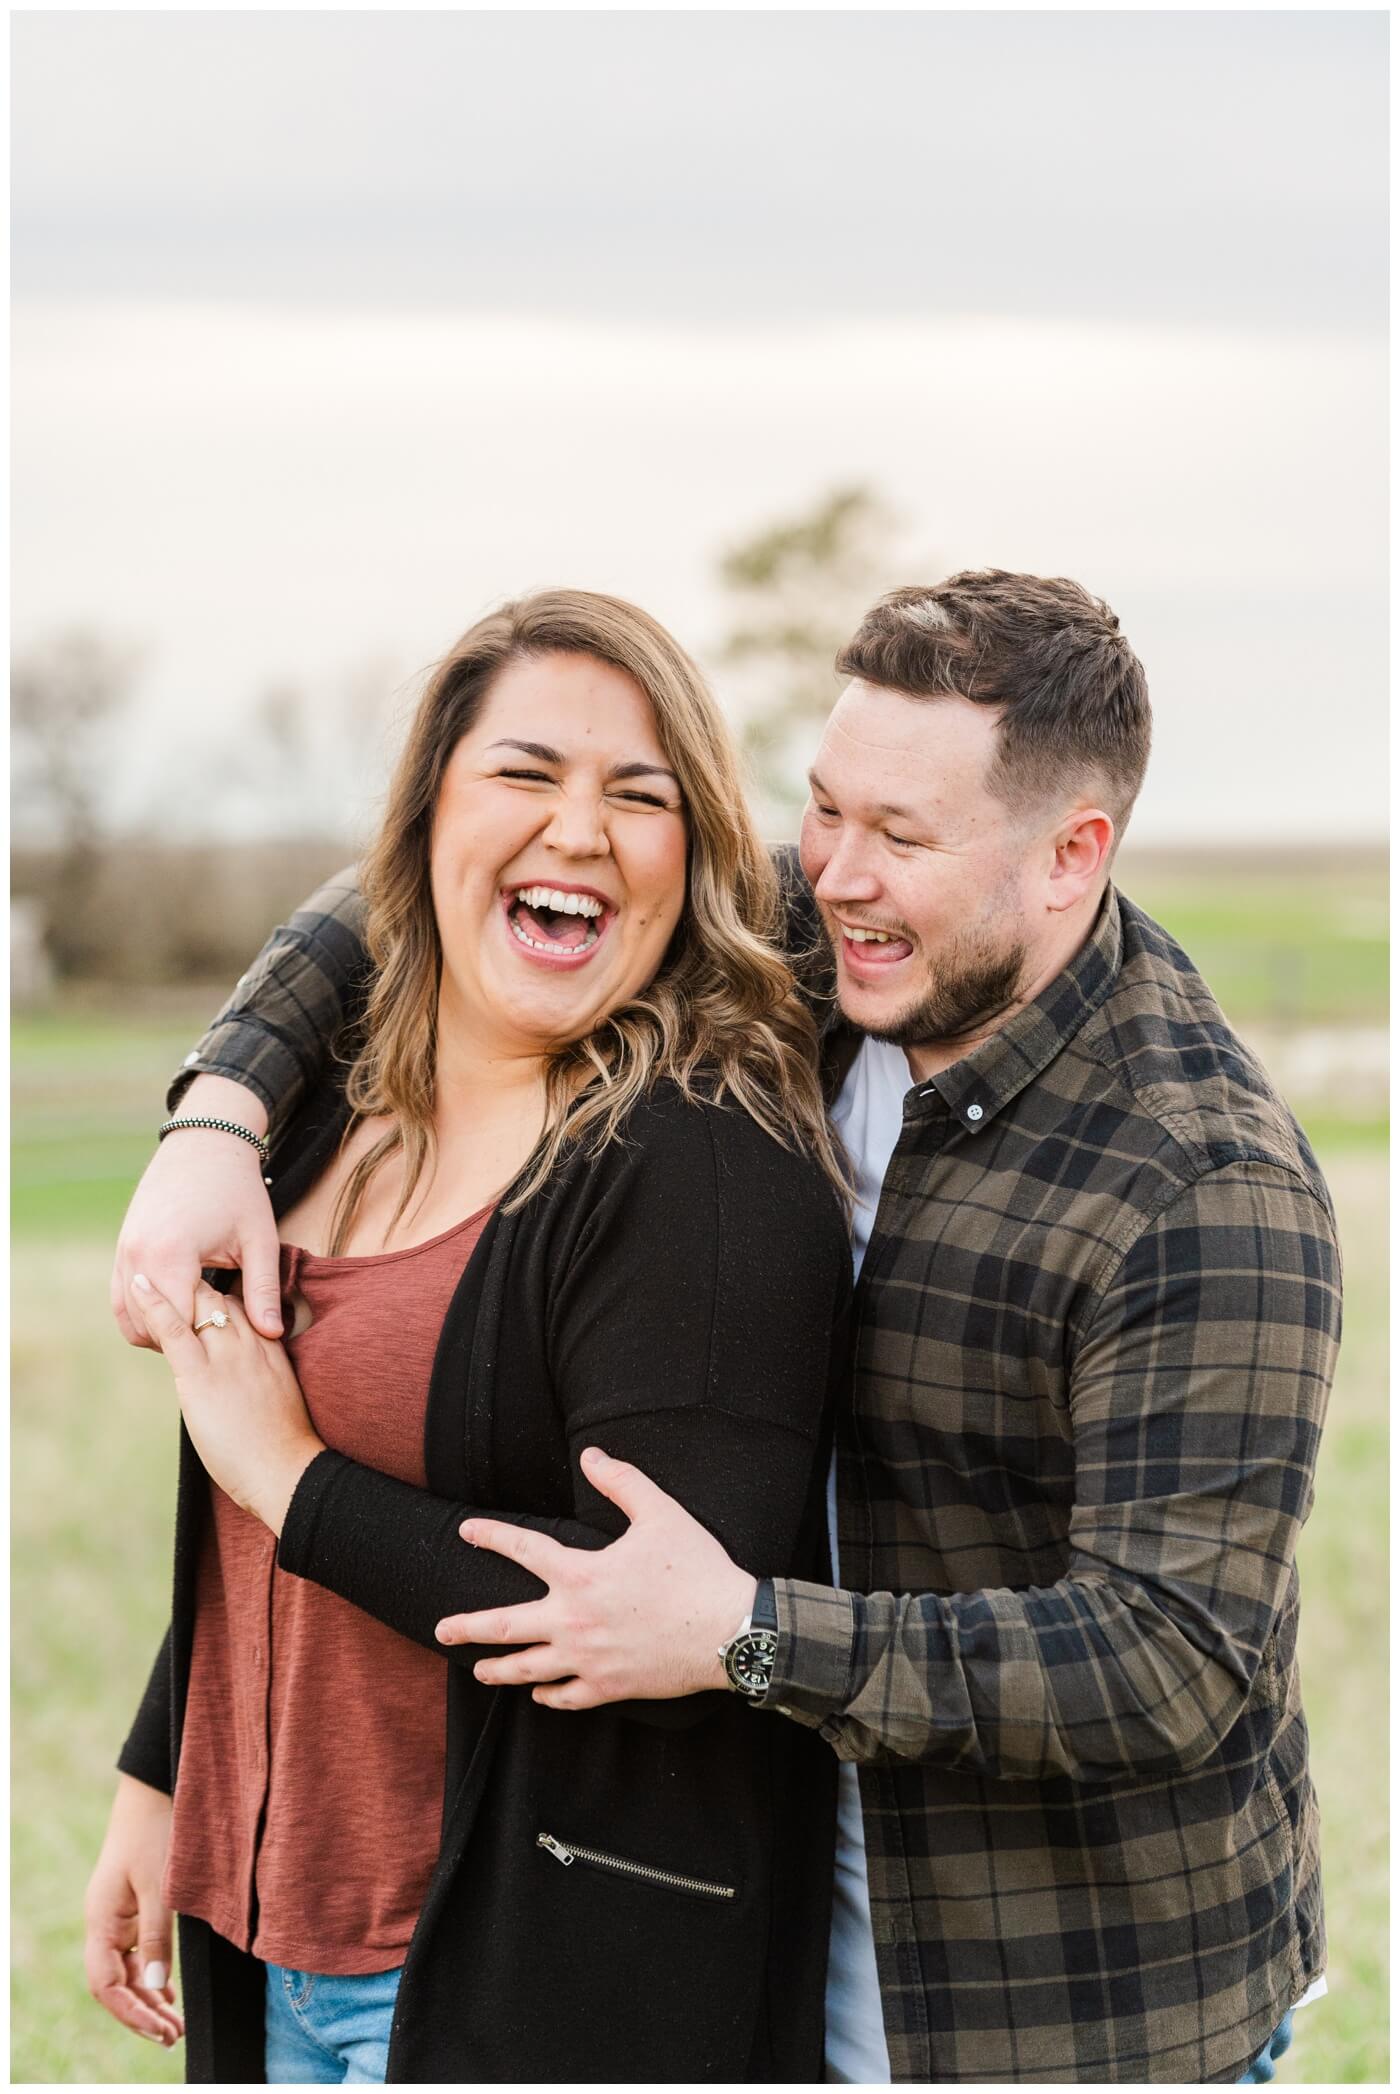 Love and laughter of Declan & Kat at their engagement session